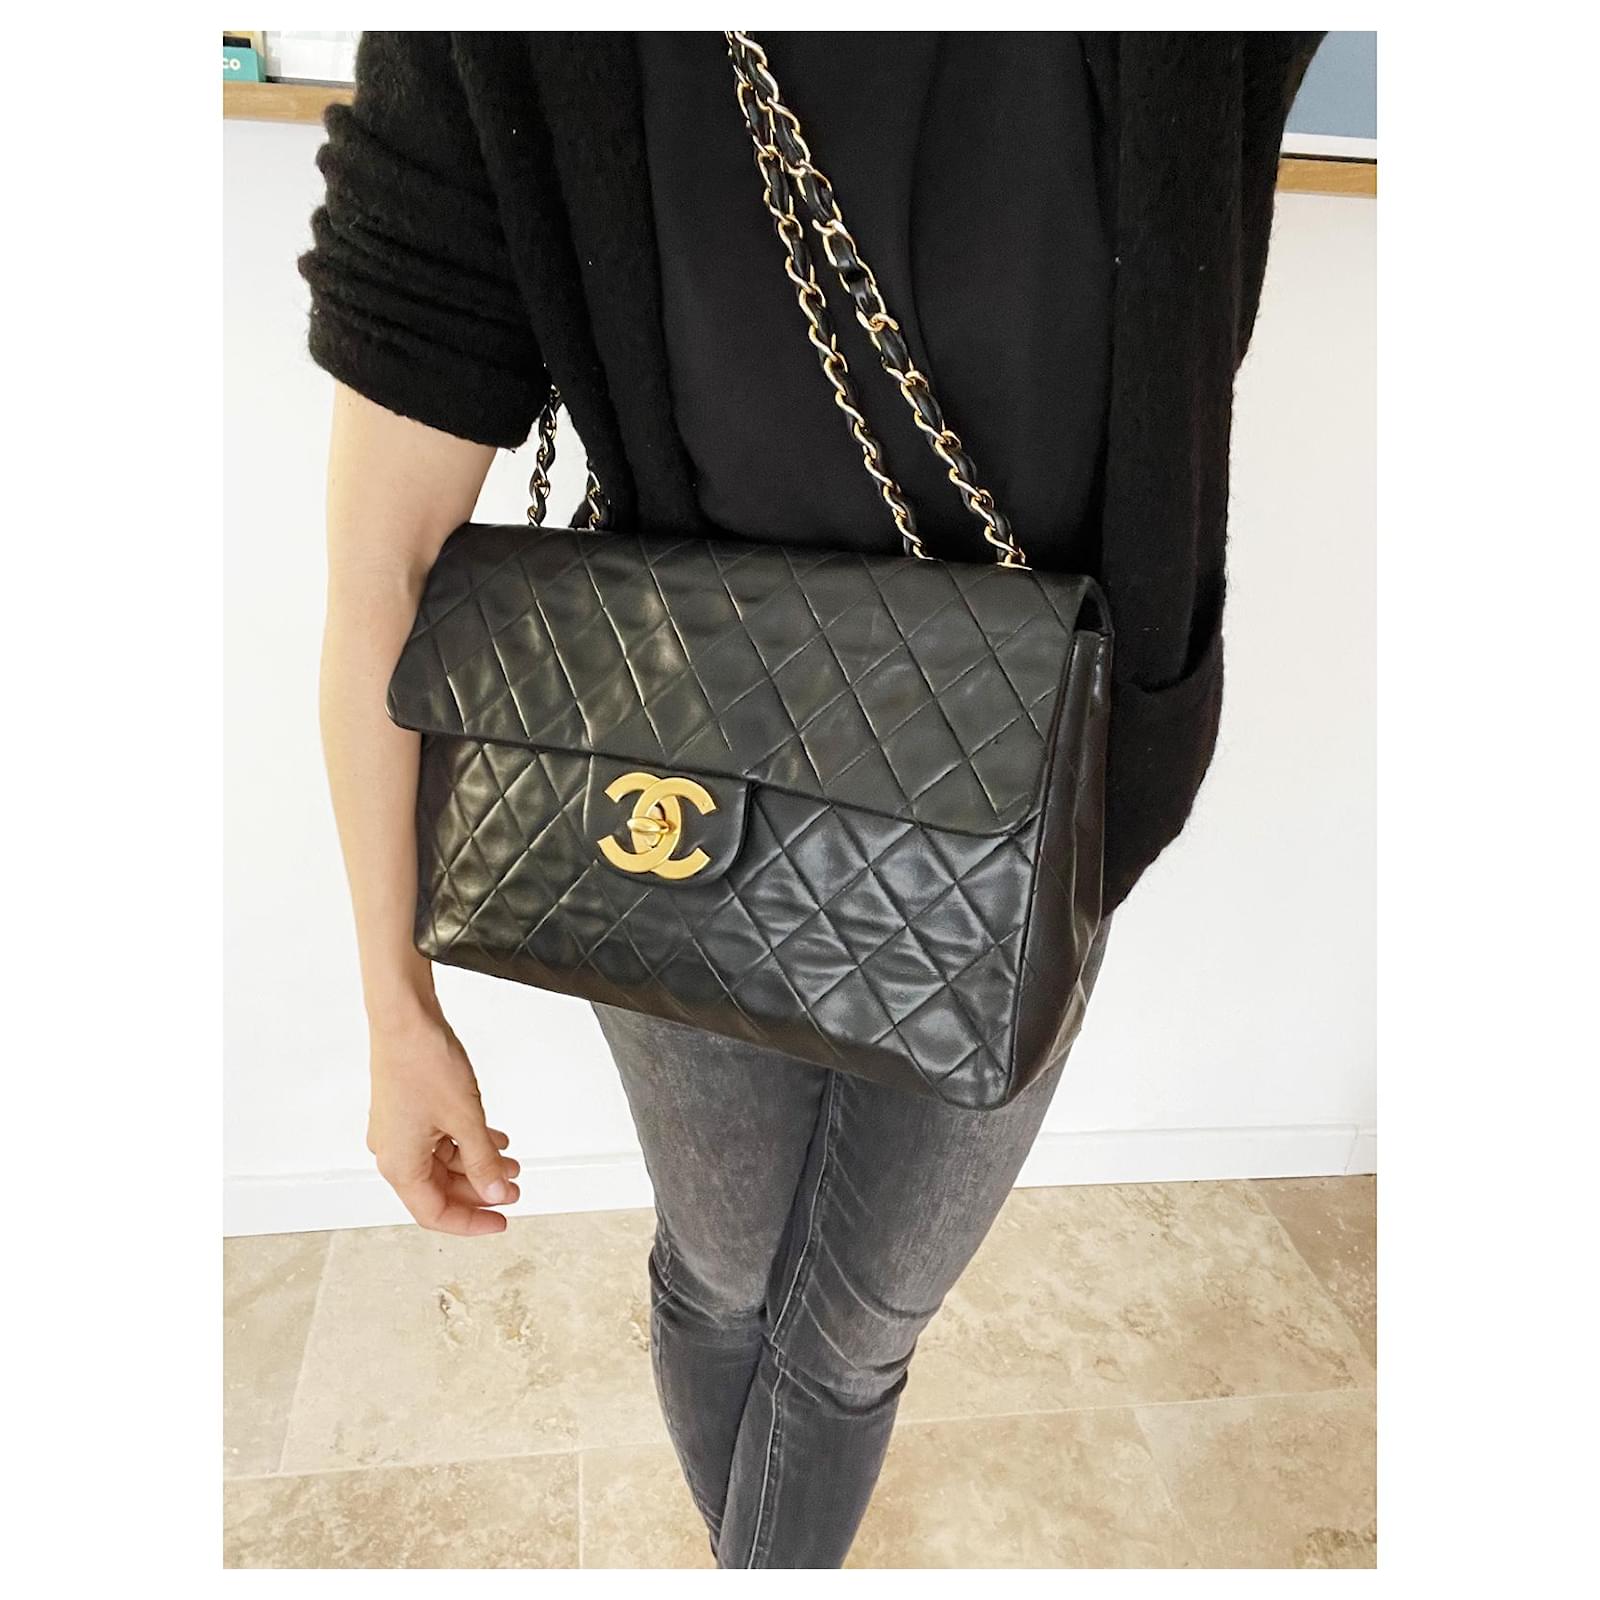 Chanel Increased Price of Medium Classic Flap Bag by 72 Percent in